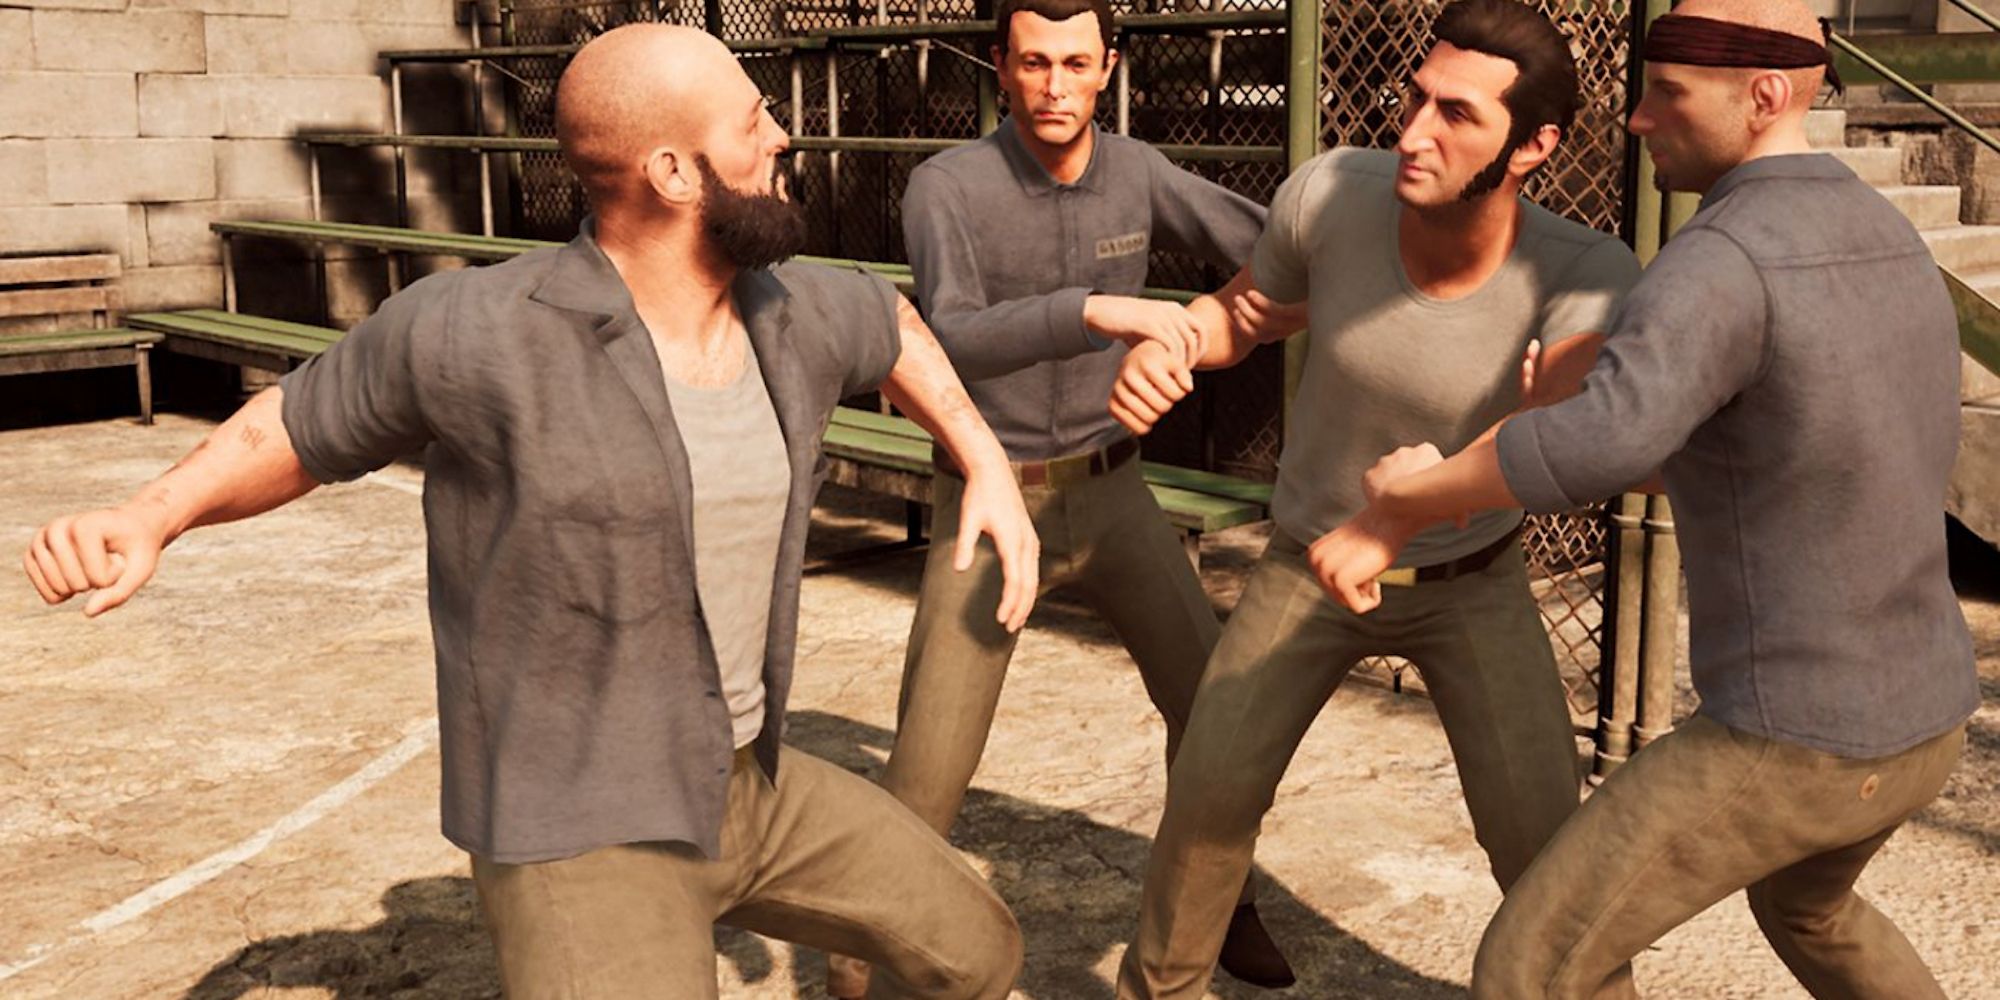 A cutscene featuring characters in A Way Out